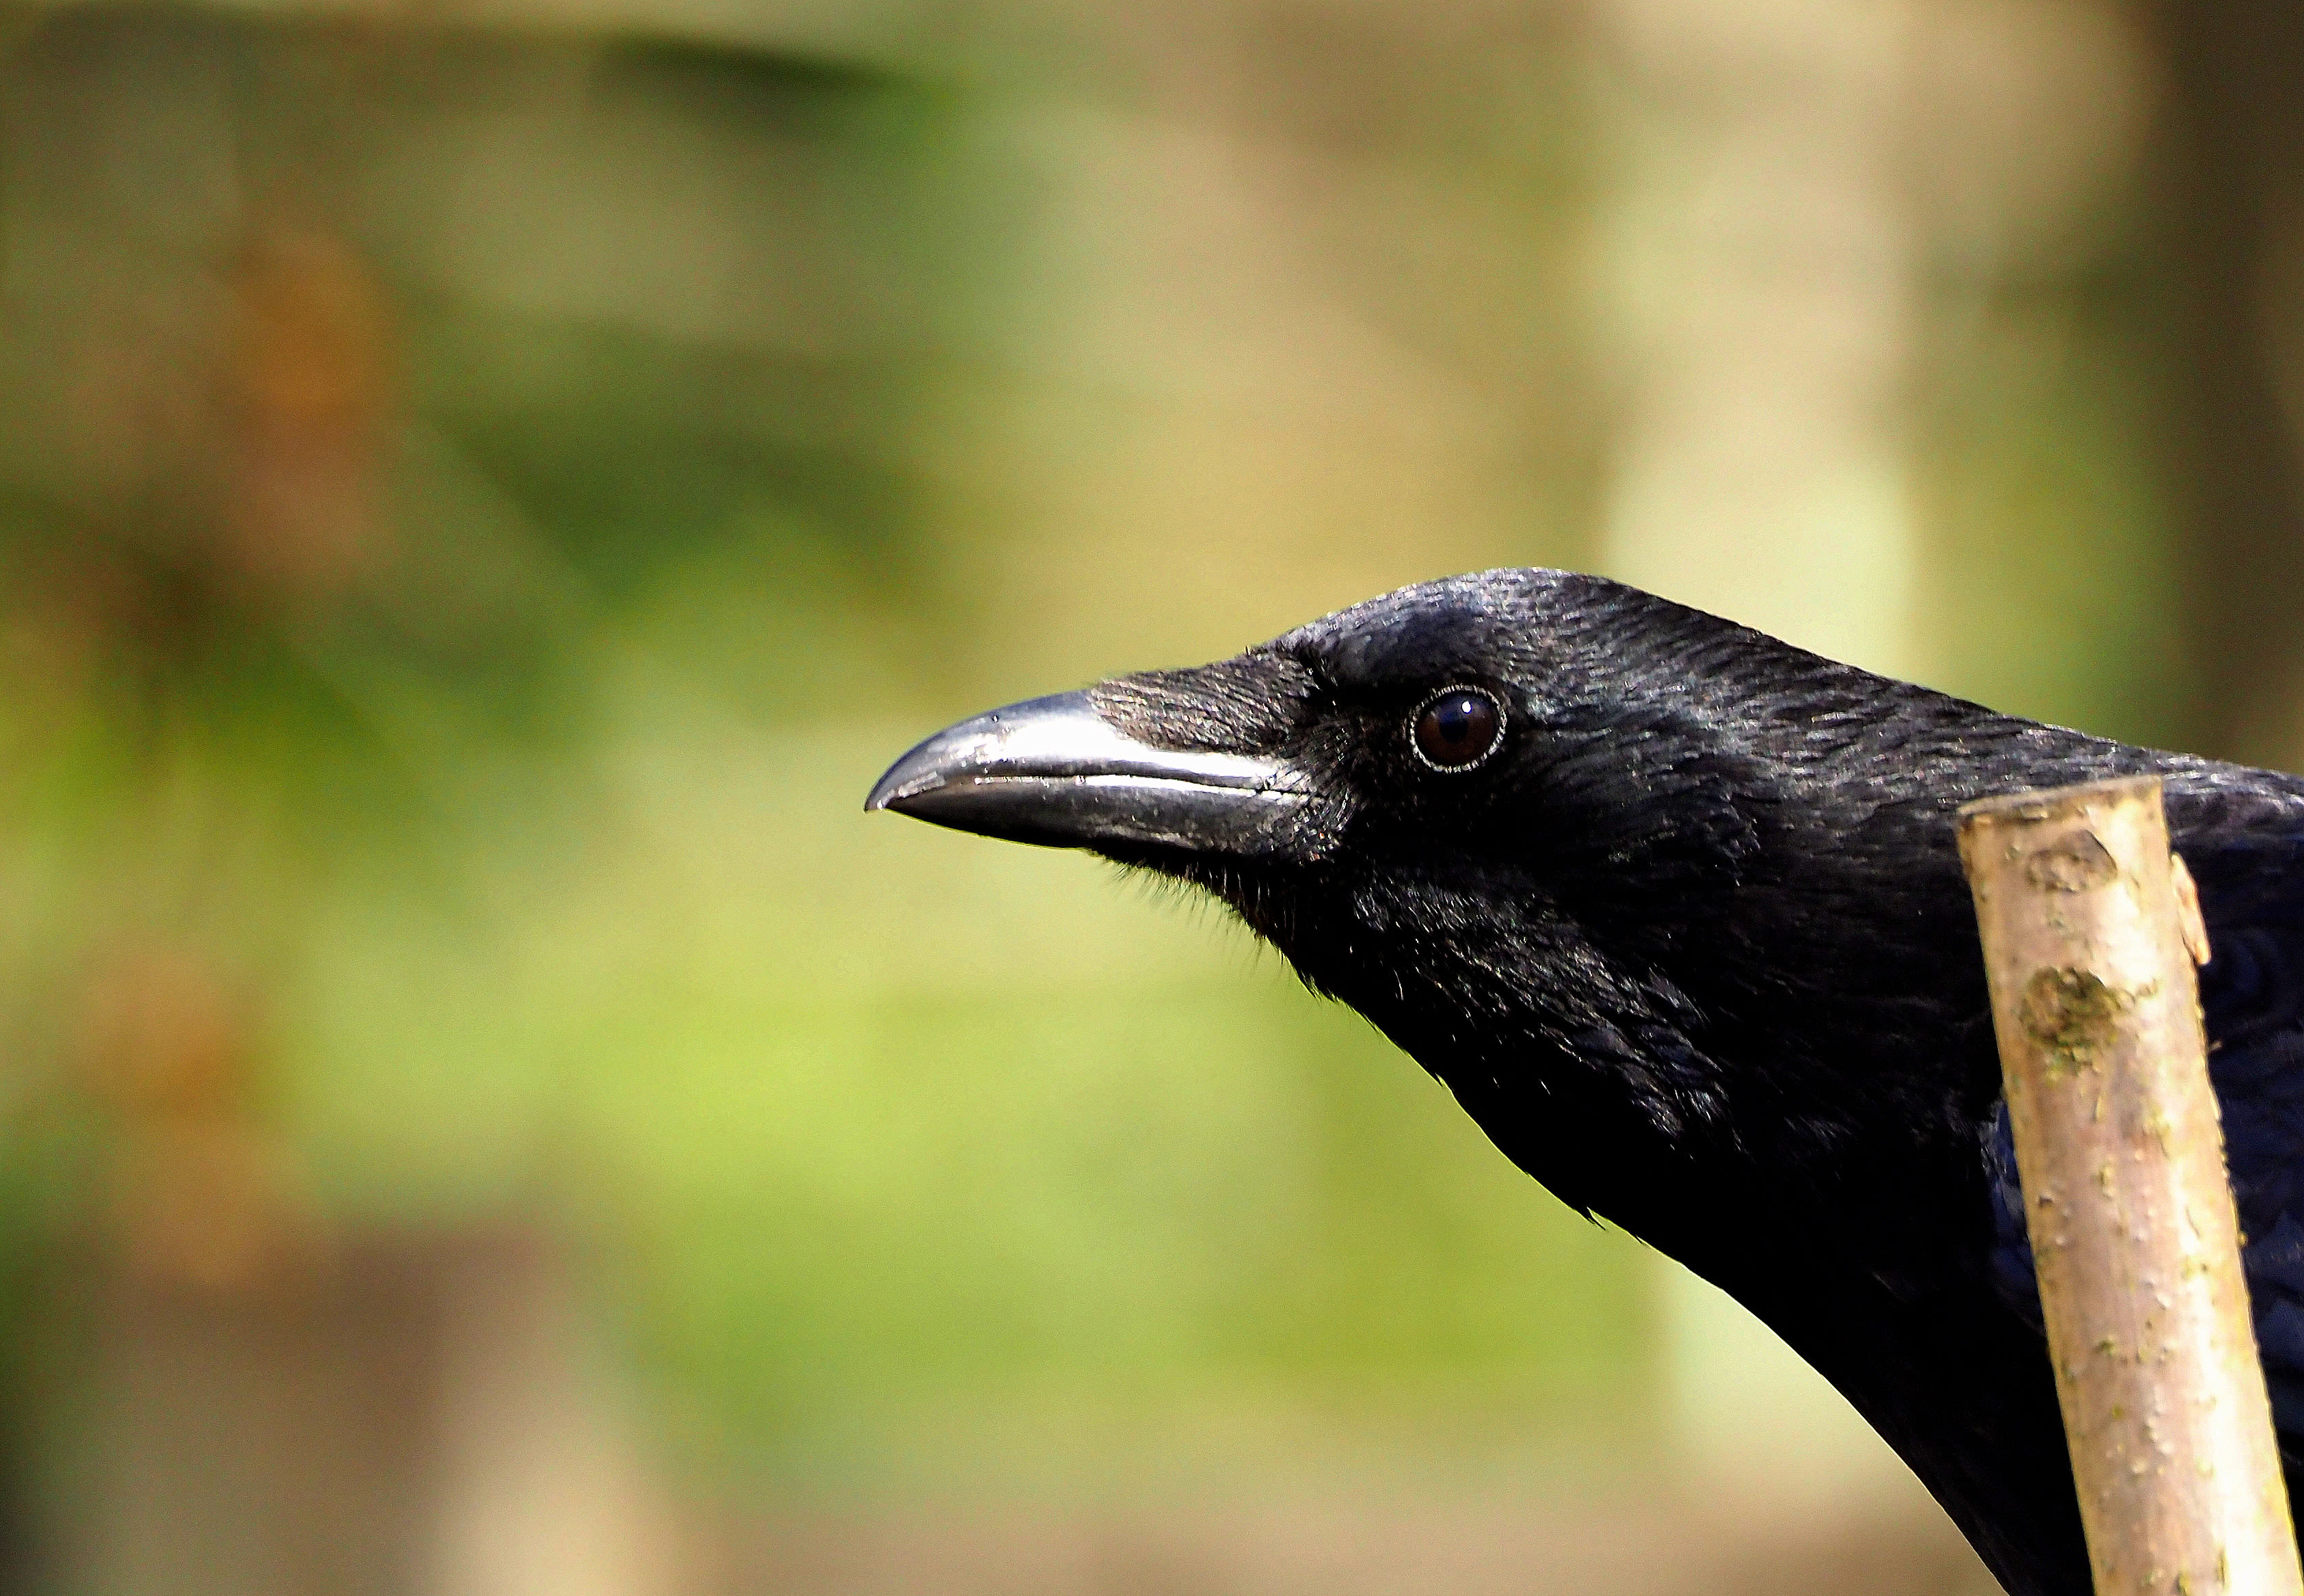 Crows Can 'Count' Up to Four Like Human Toddlers, Study Suggests